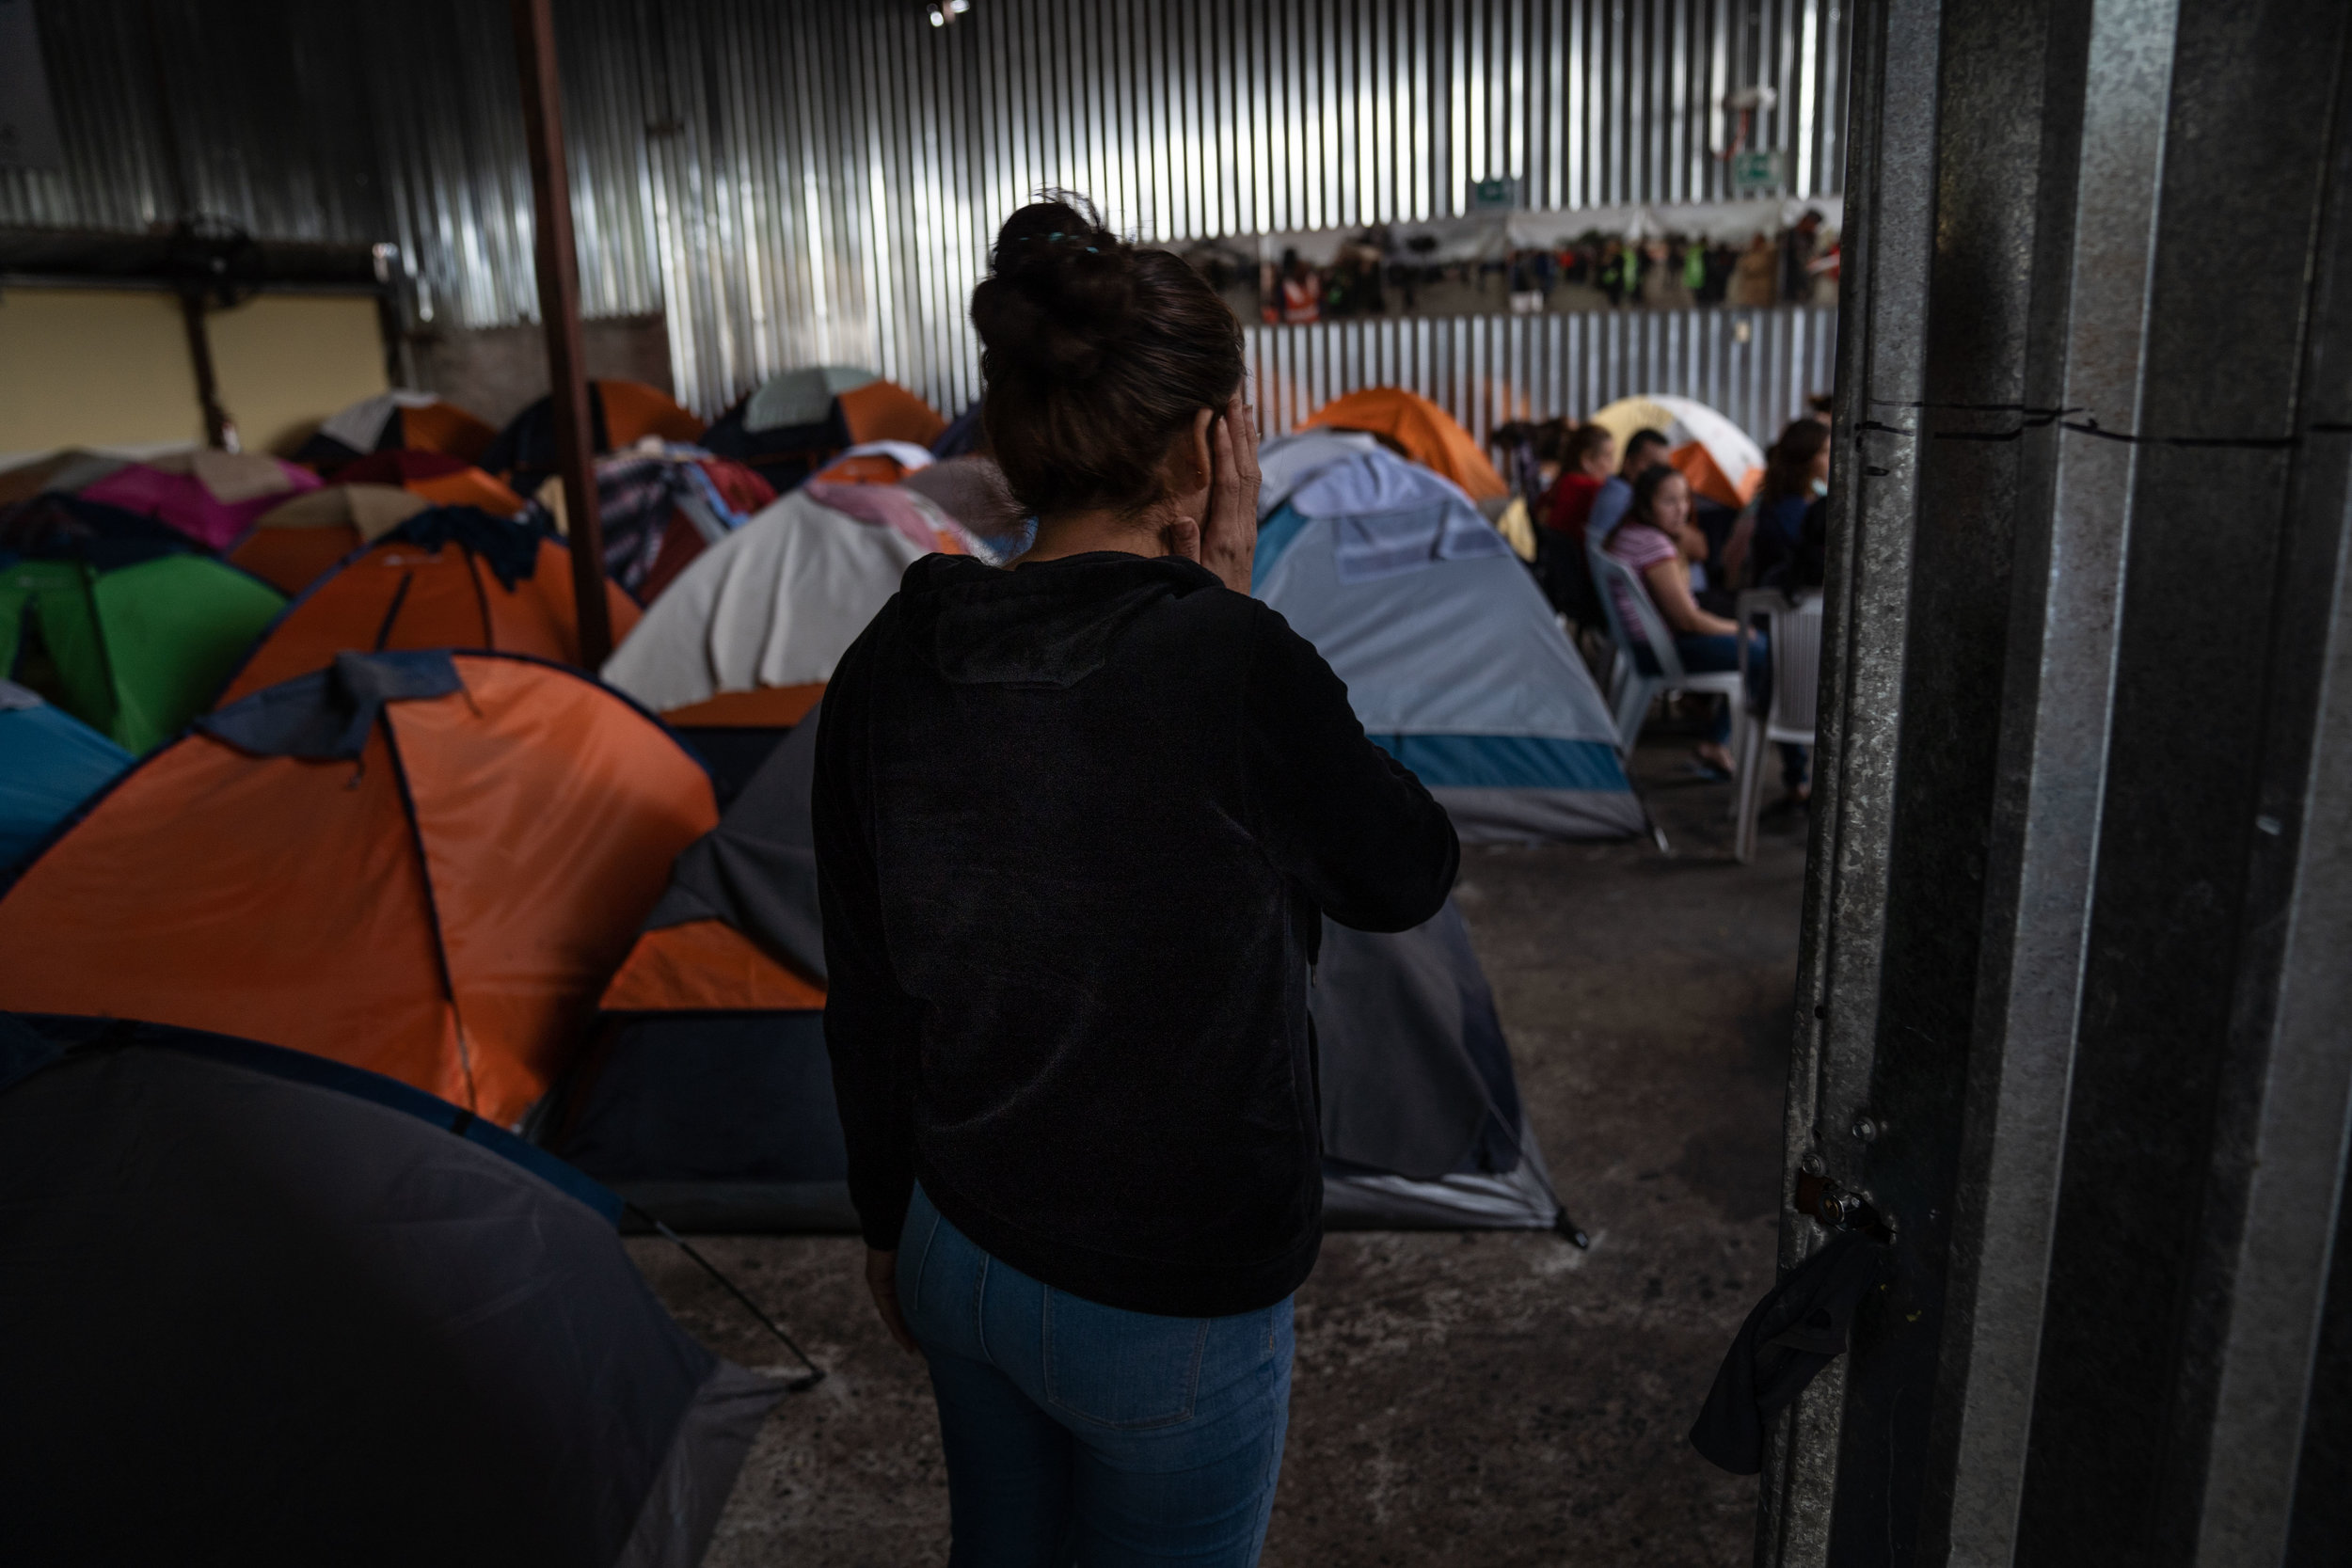   A migrant who was returned to Mexico under the “Remain in Mexico” policy walks at a shelter in Tijuana in May, 2019.  